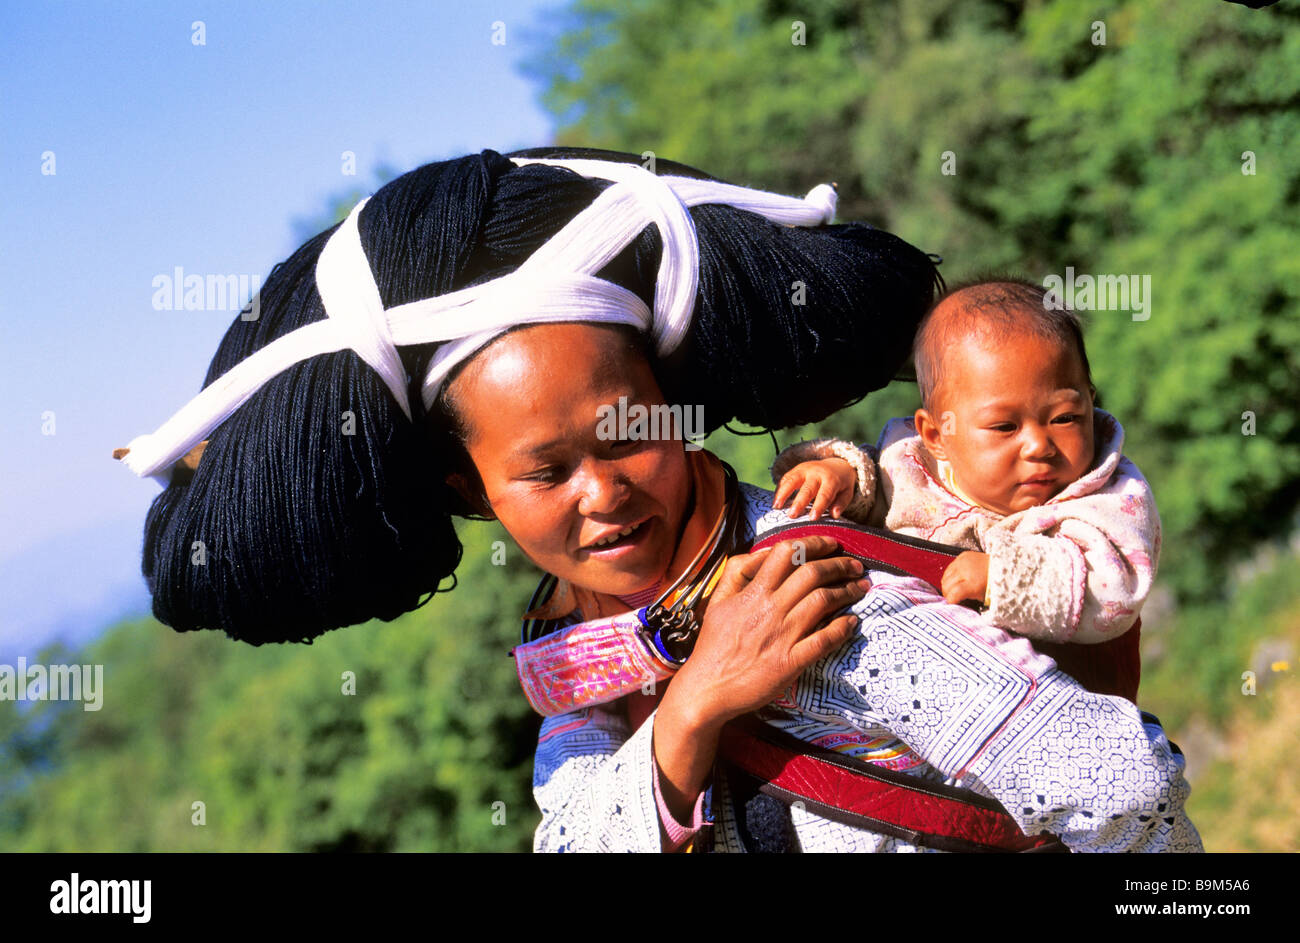 China, Guizhou province, Longhorn Miaos ethnic group woman and baby wearing wool and haircloth artificial that they reel up Stock Photo